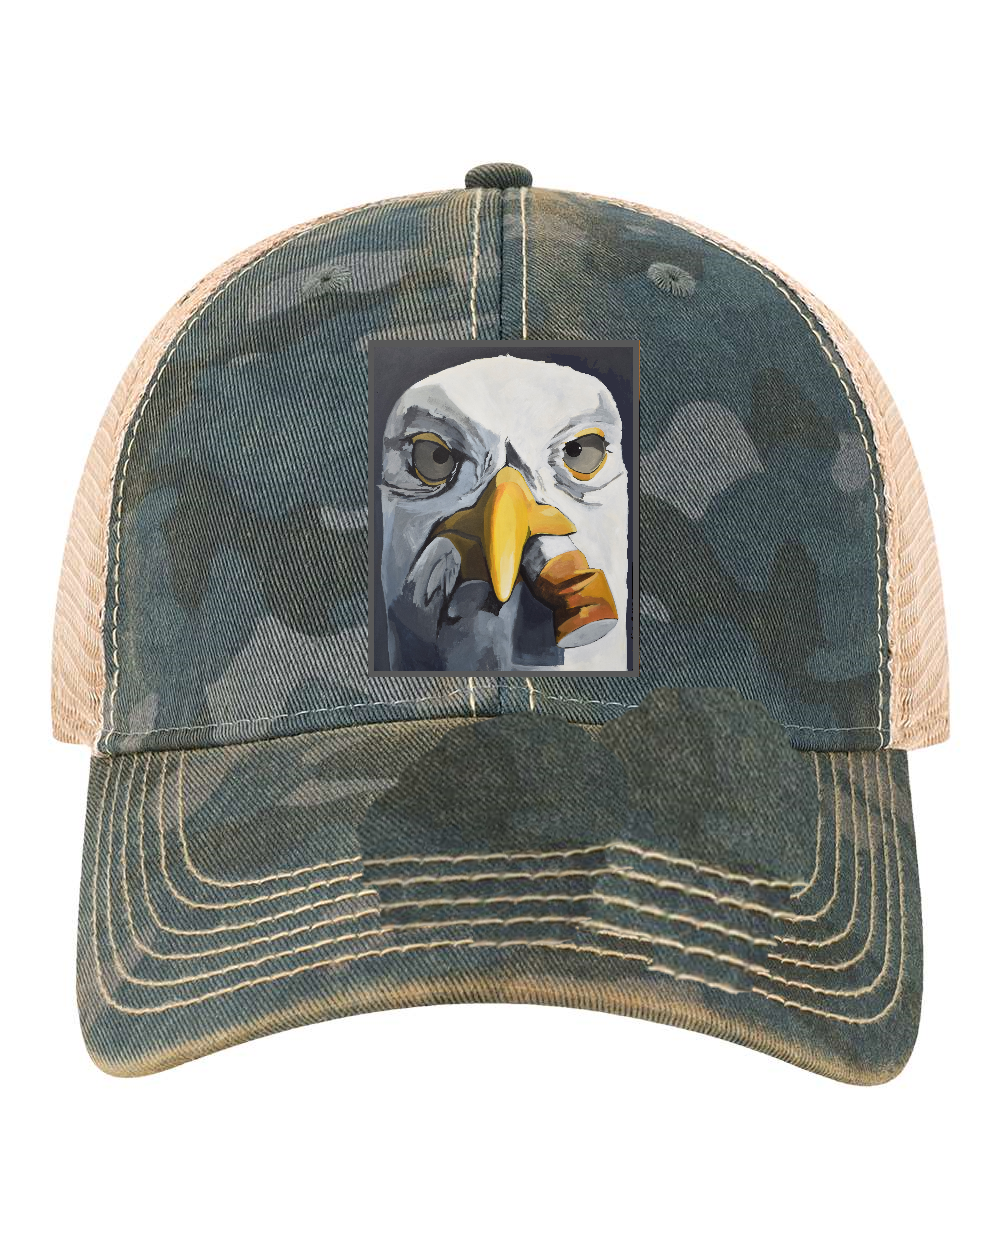 Navy Camo Unstructured Hats Flyn Costello Seagull with Cig  